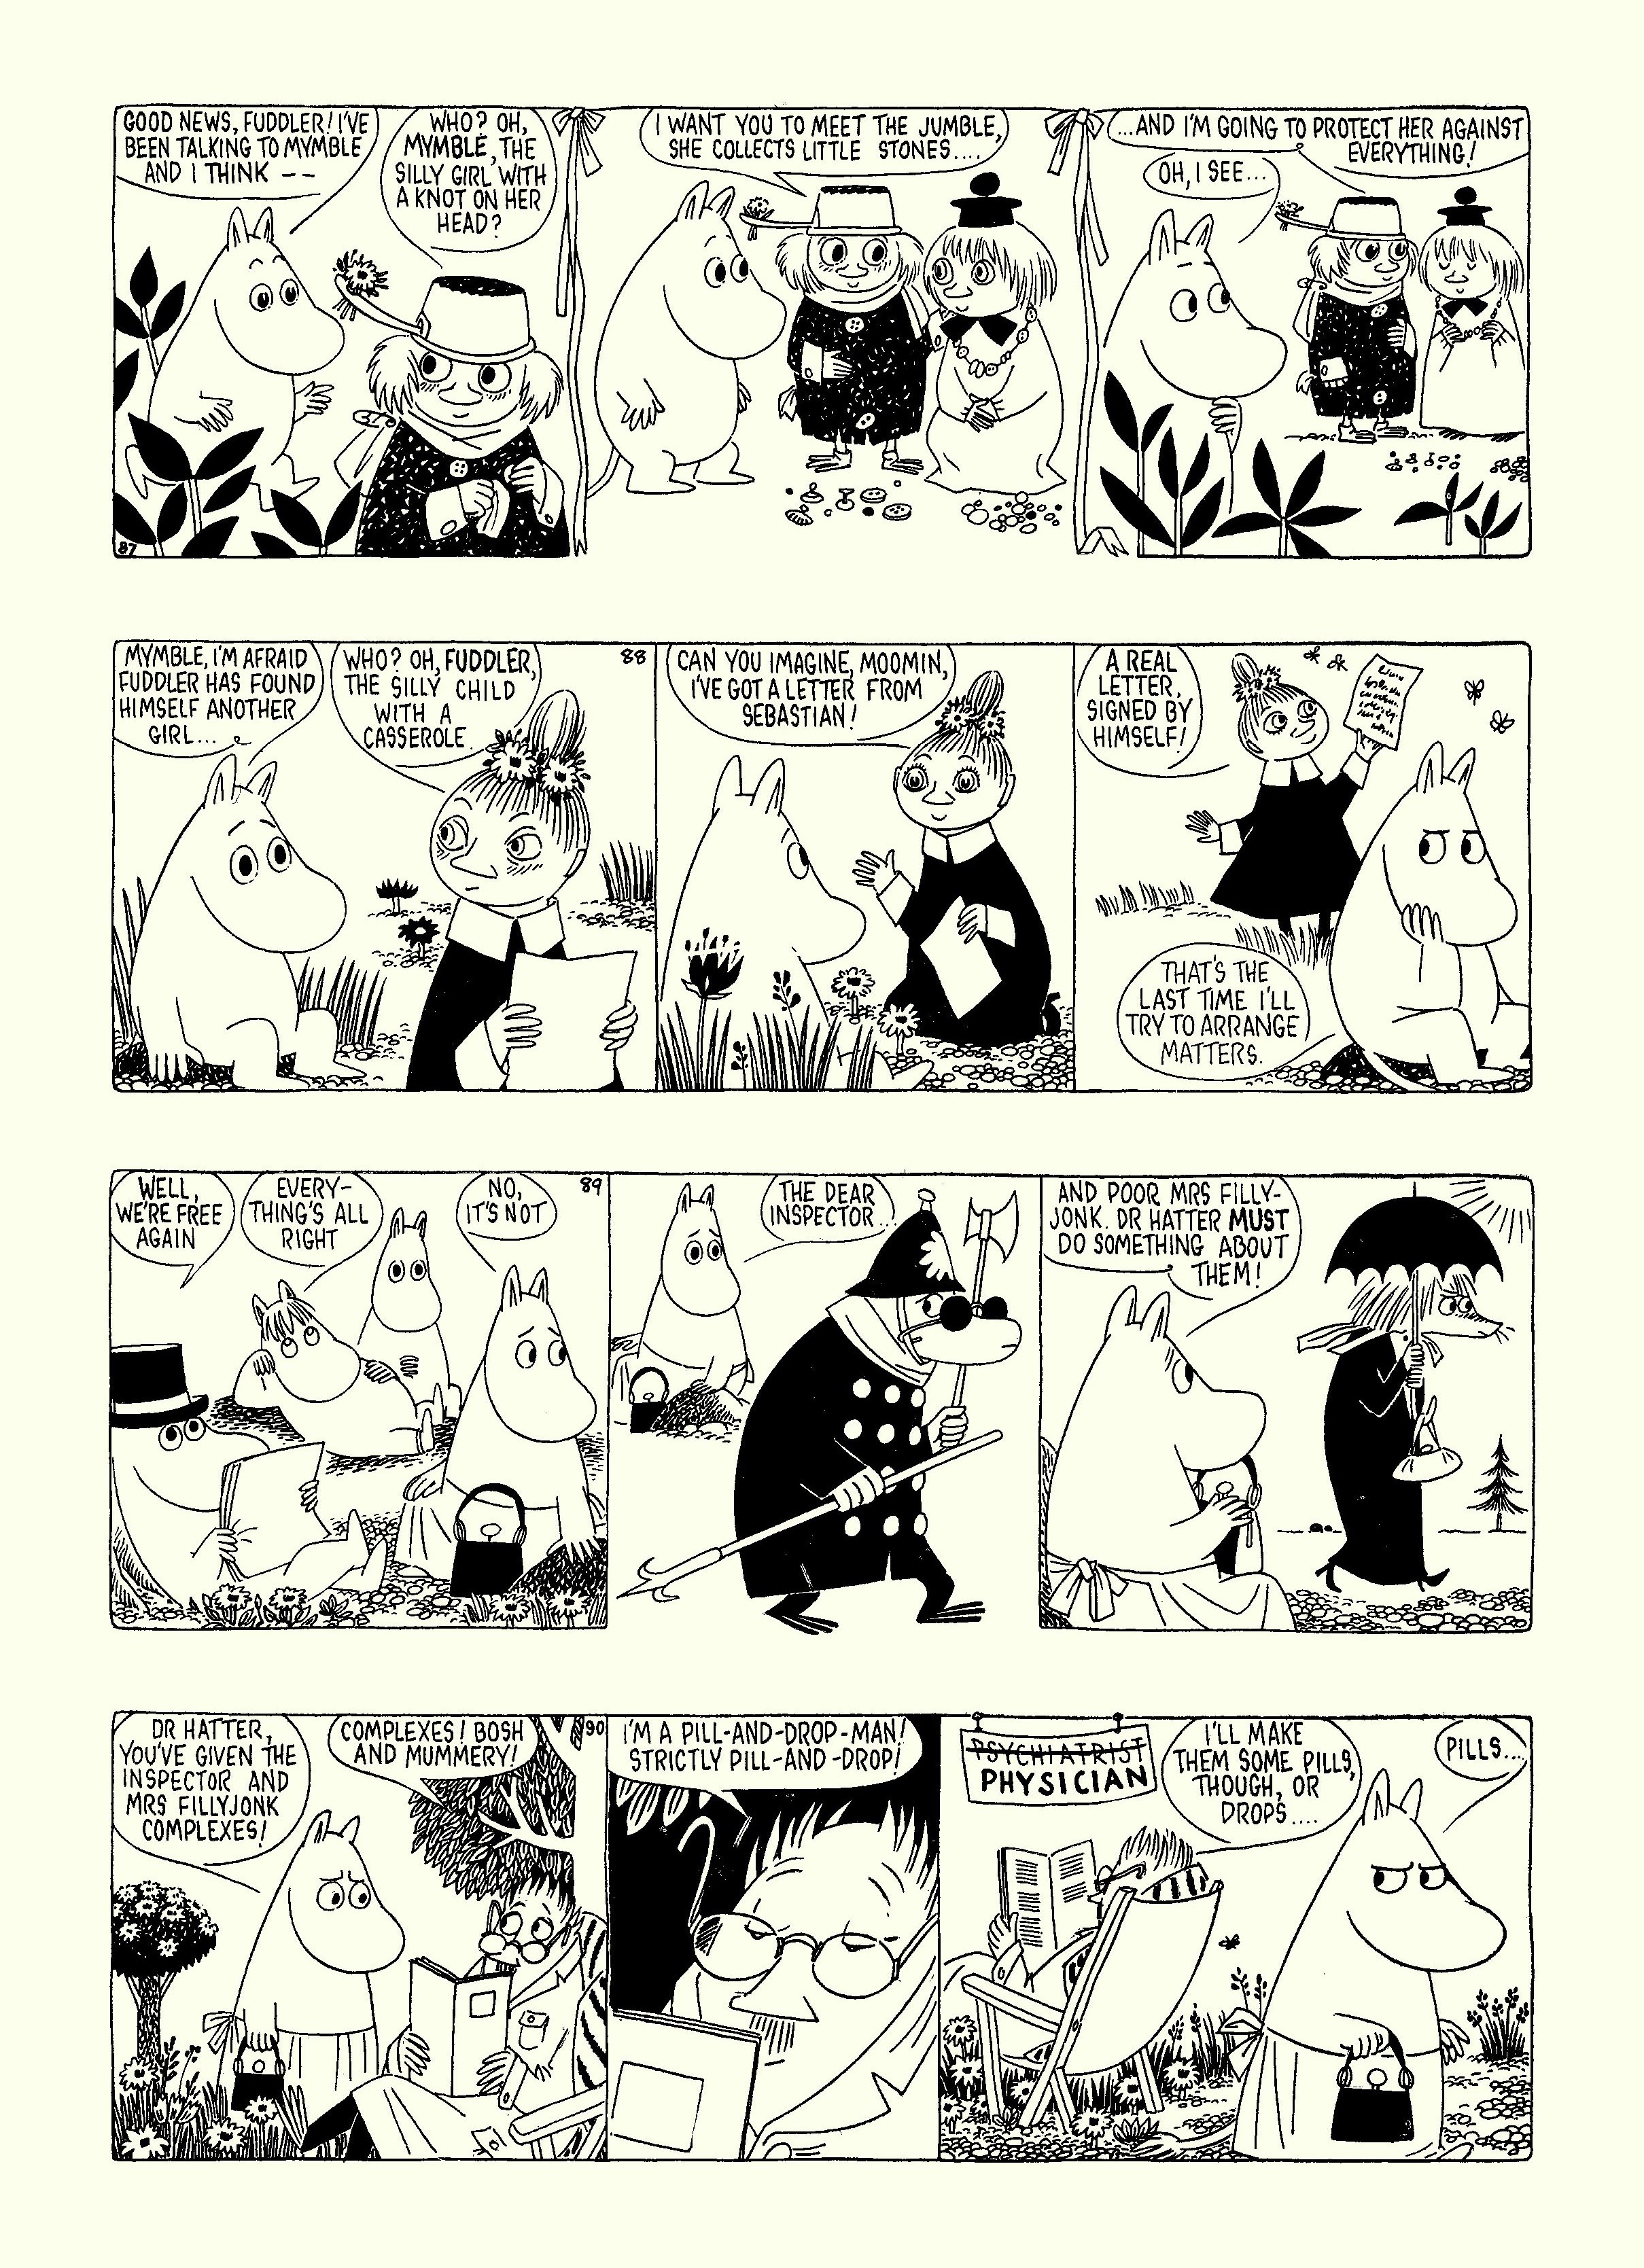 Read online Moomin: The Complete Tove Jansson Comic Strip comic -  Issue # TPB 5 - 79